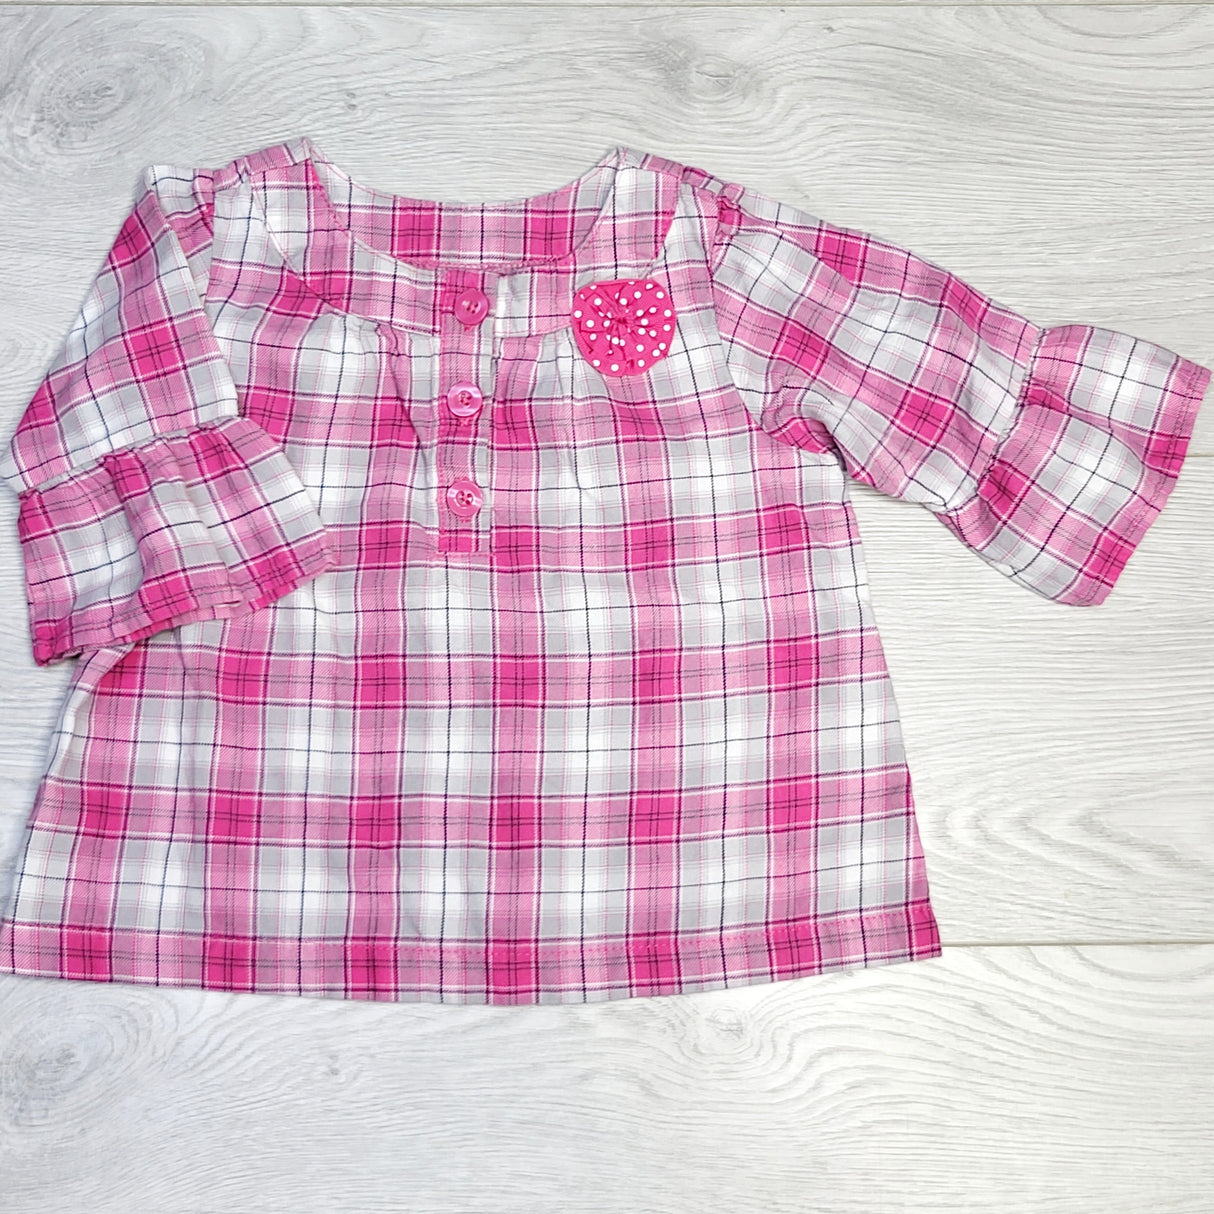 GDM1 - Carters pink plaid top, size 24 months